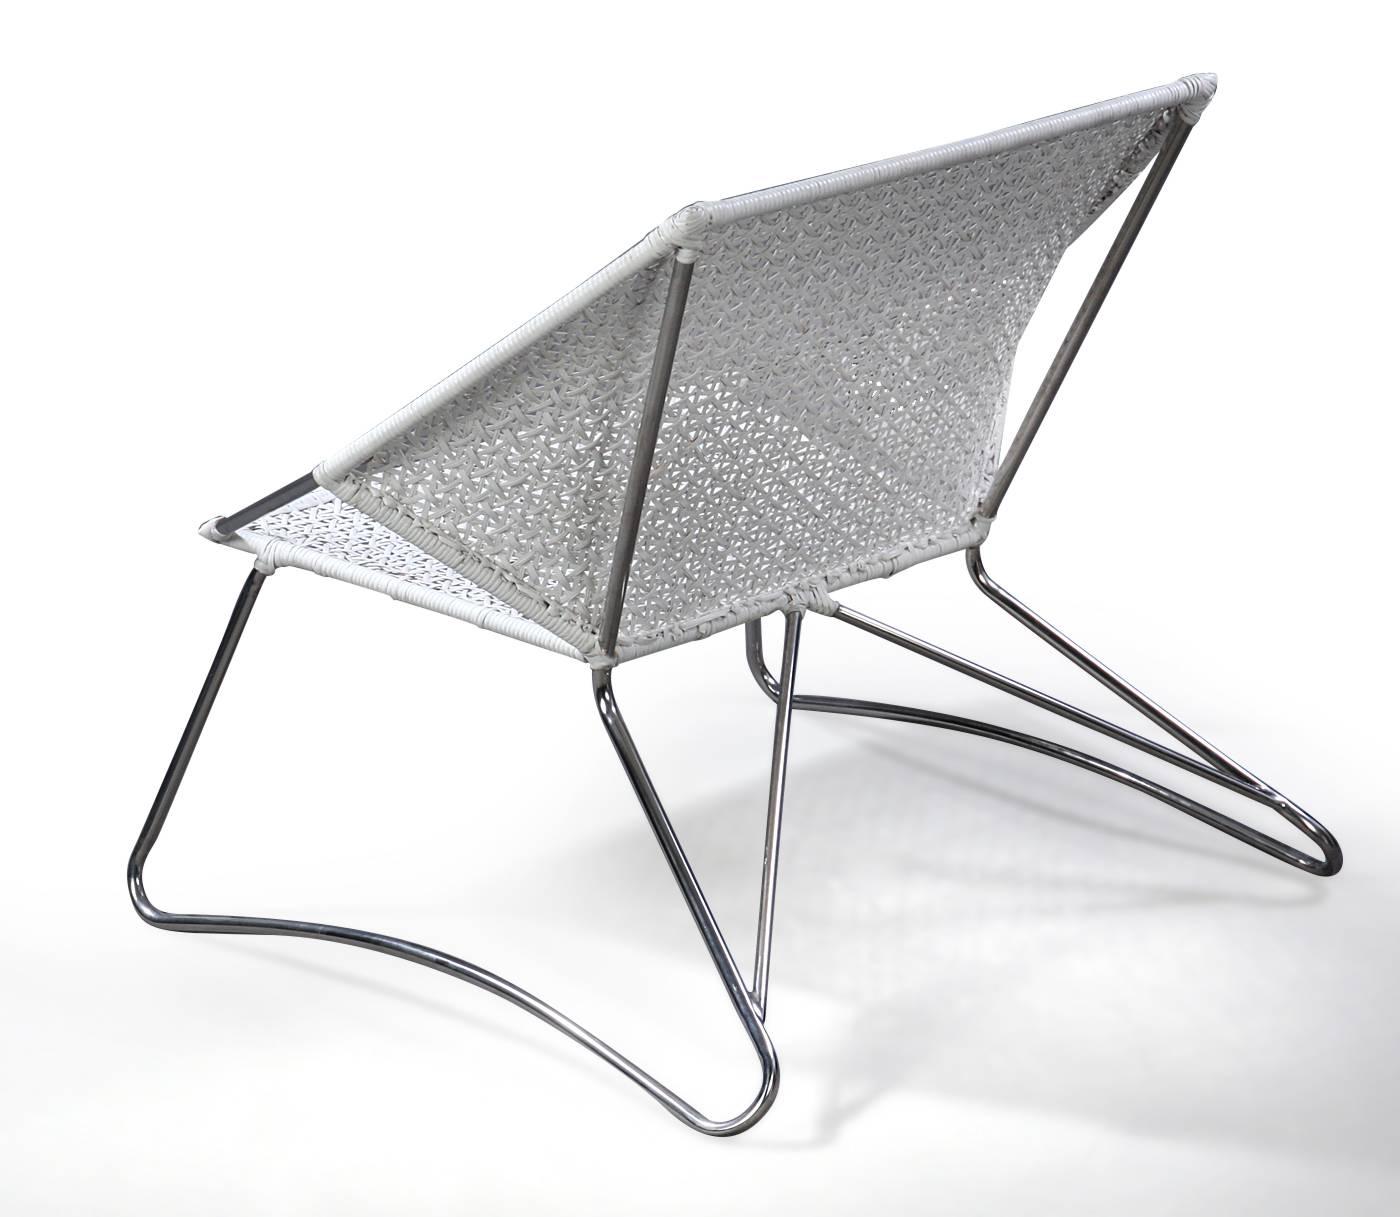 Armchair with stainless steel structure, white weave. 
Measure: H 74/35, B 89, D 75 cm.